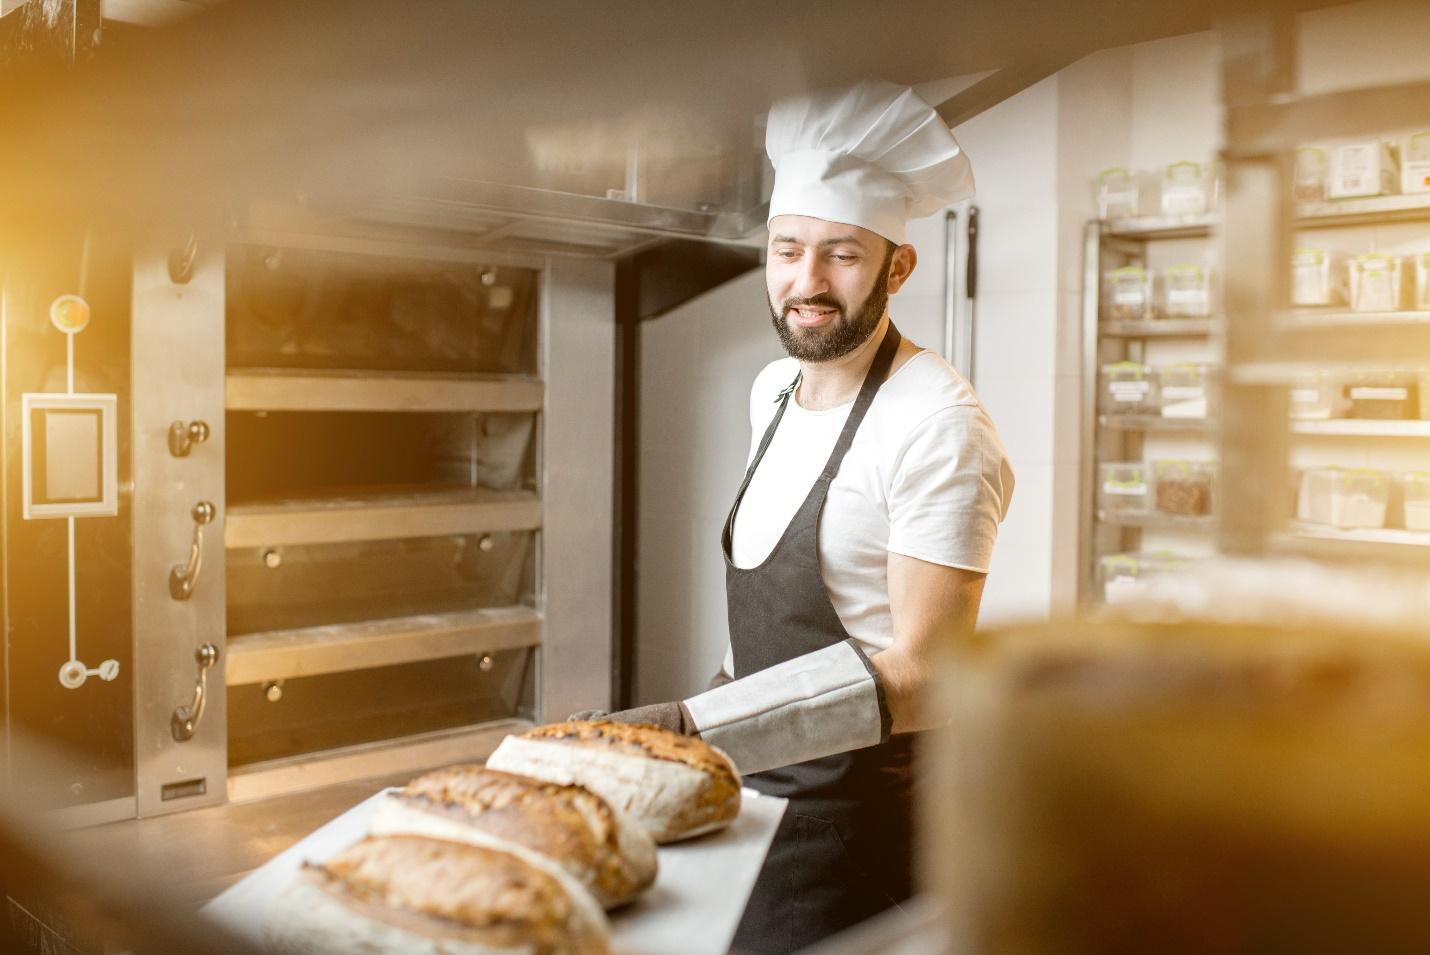 Benefits of Pneumatic Powder Handling Systems for Industrial Bakeries